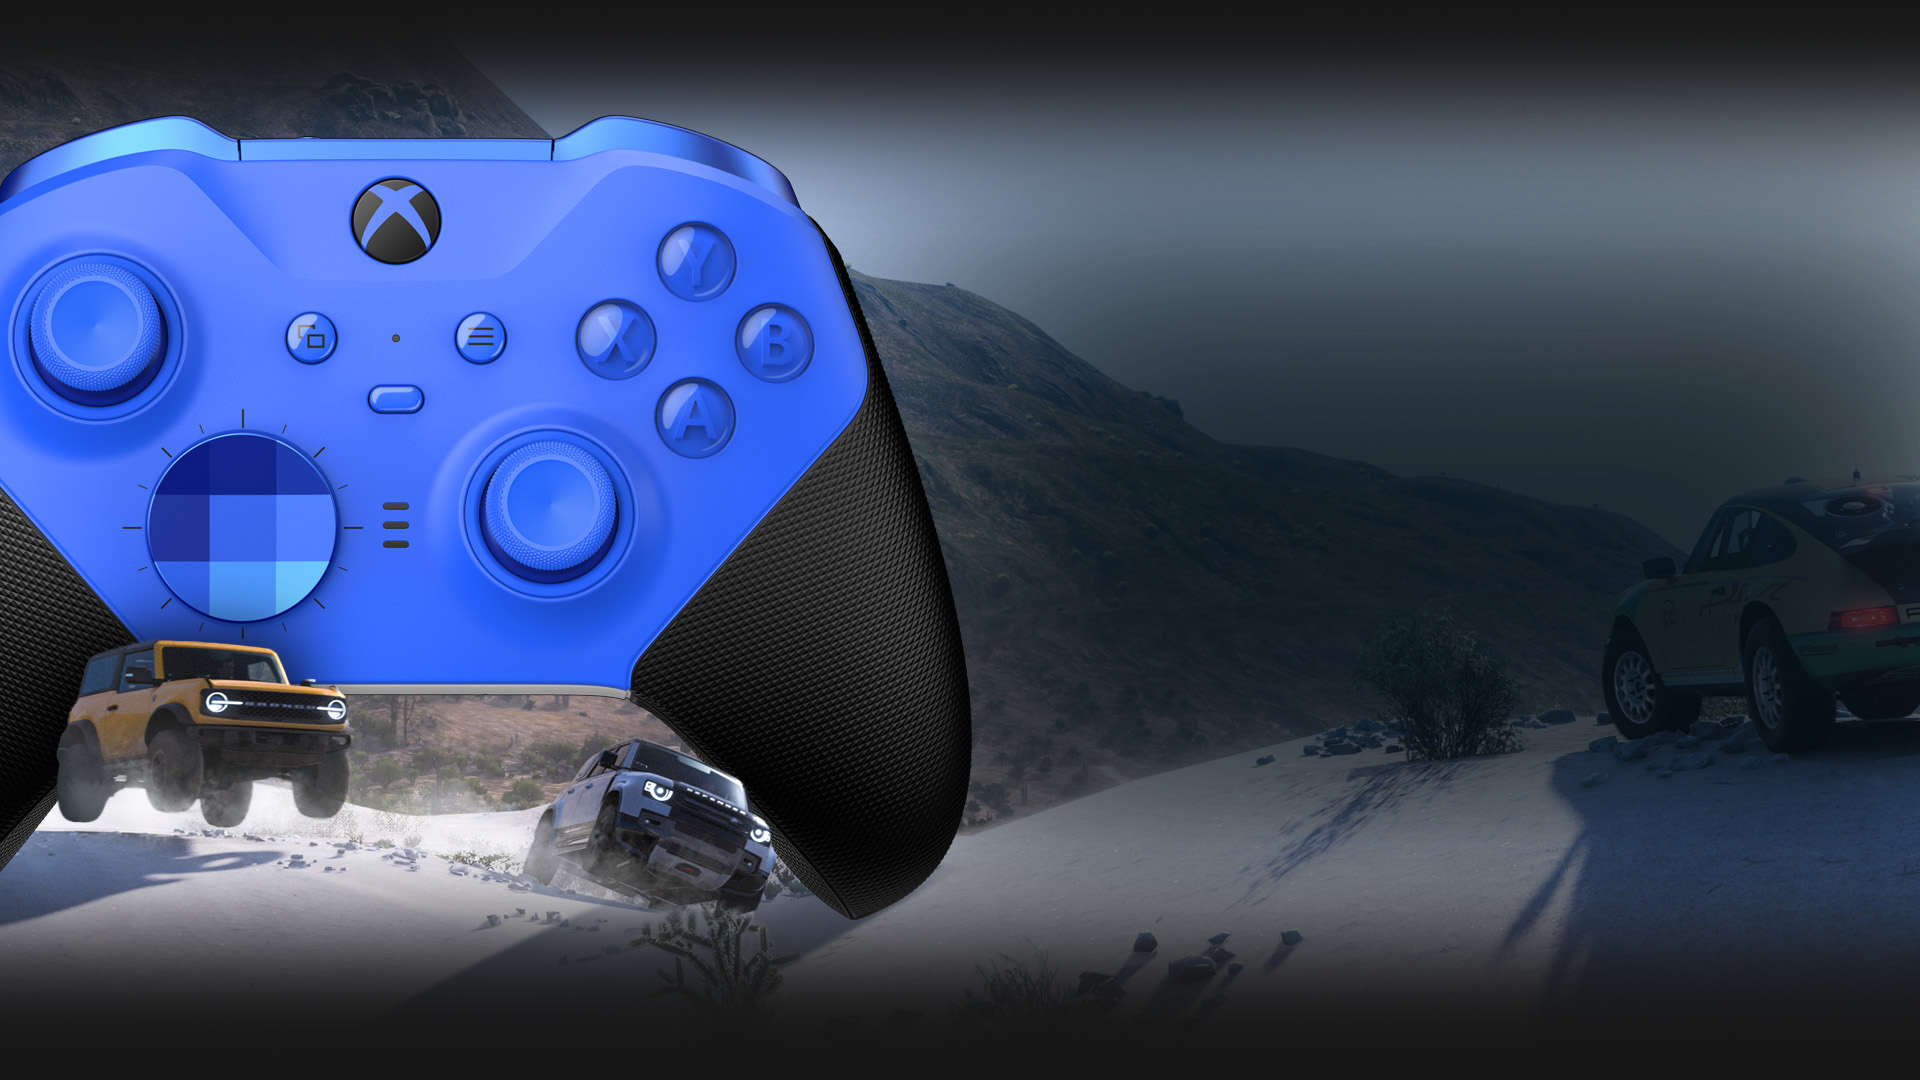 A Ford Bronco and Land Rover Defender race through the snow underneath the Xbox Elite Wireless Controller Series 2 – Core (Blue).